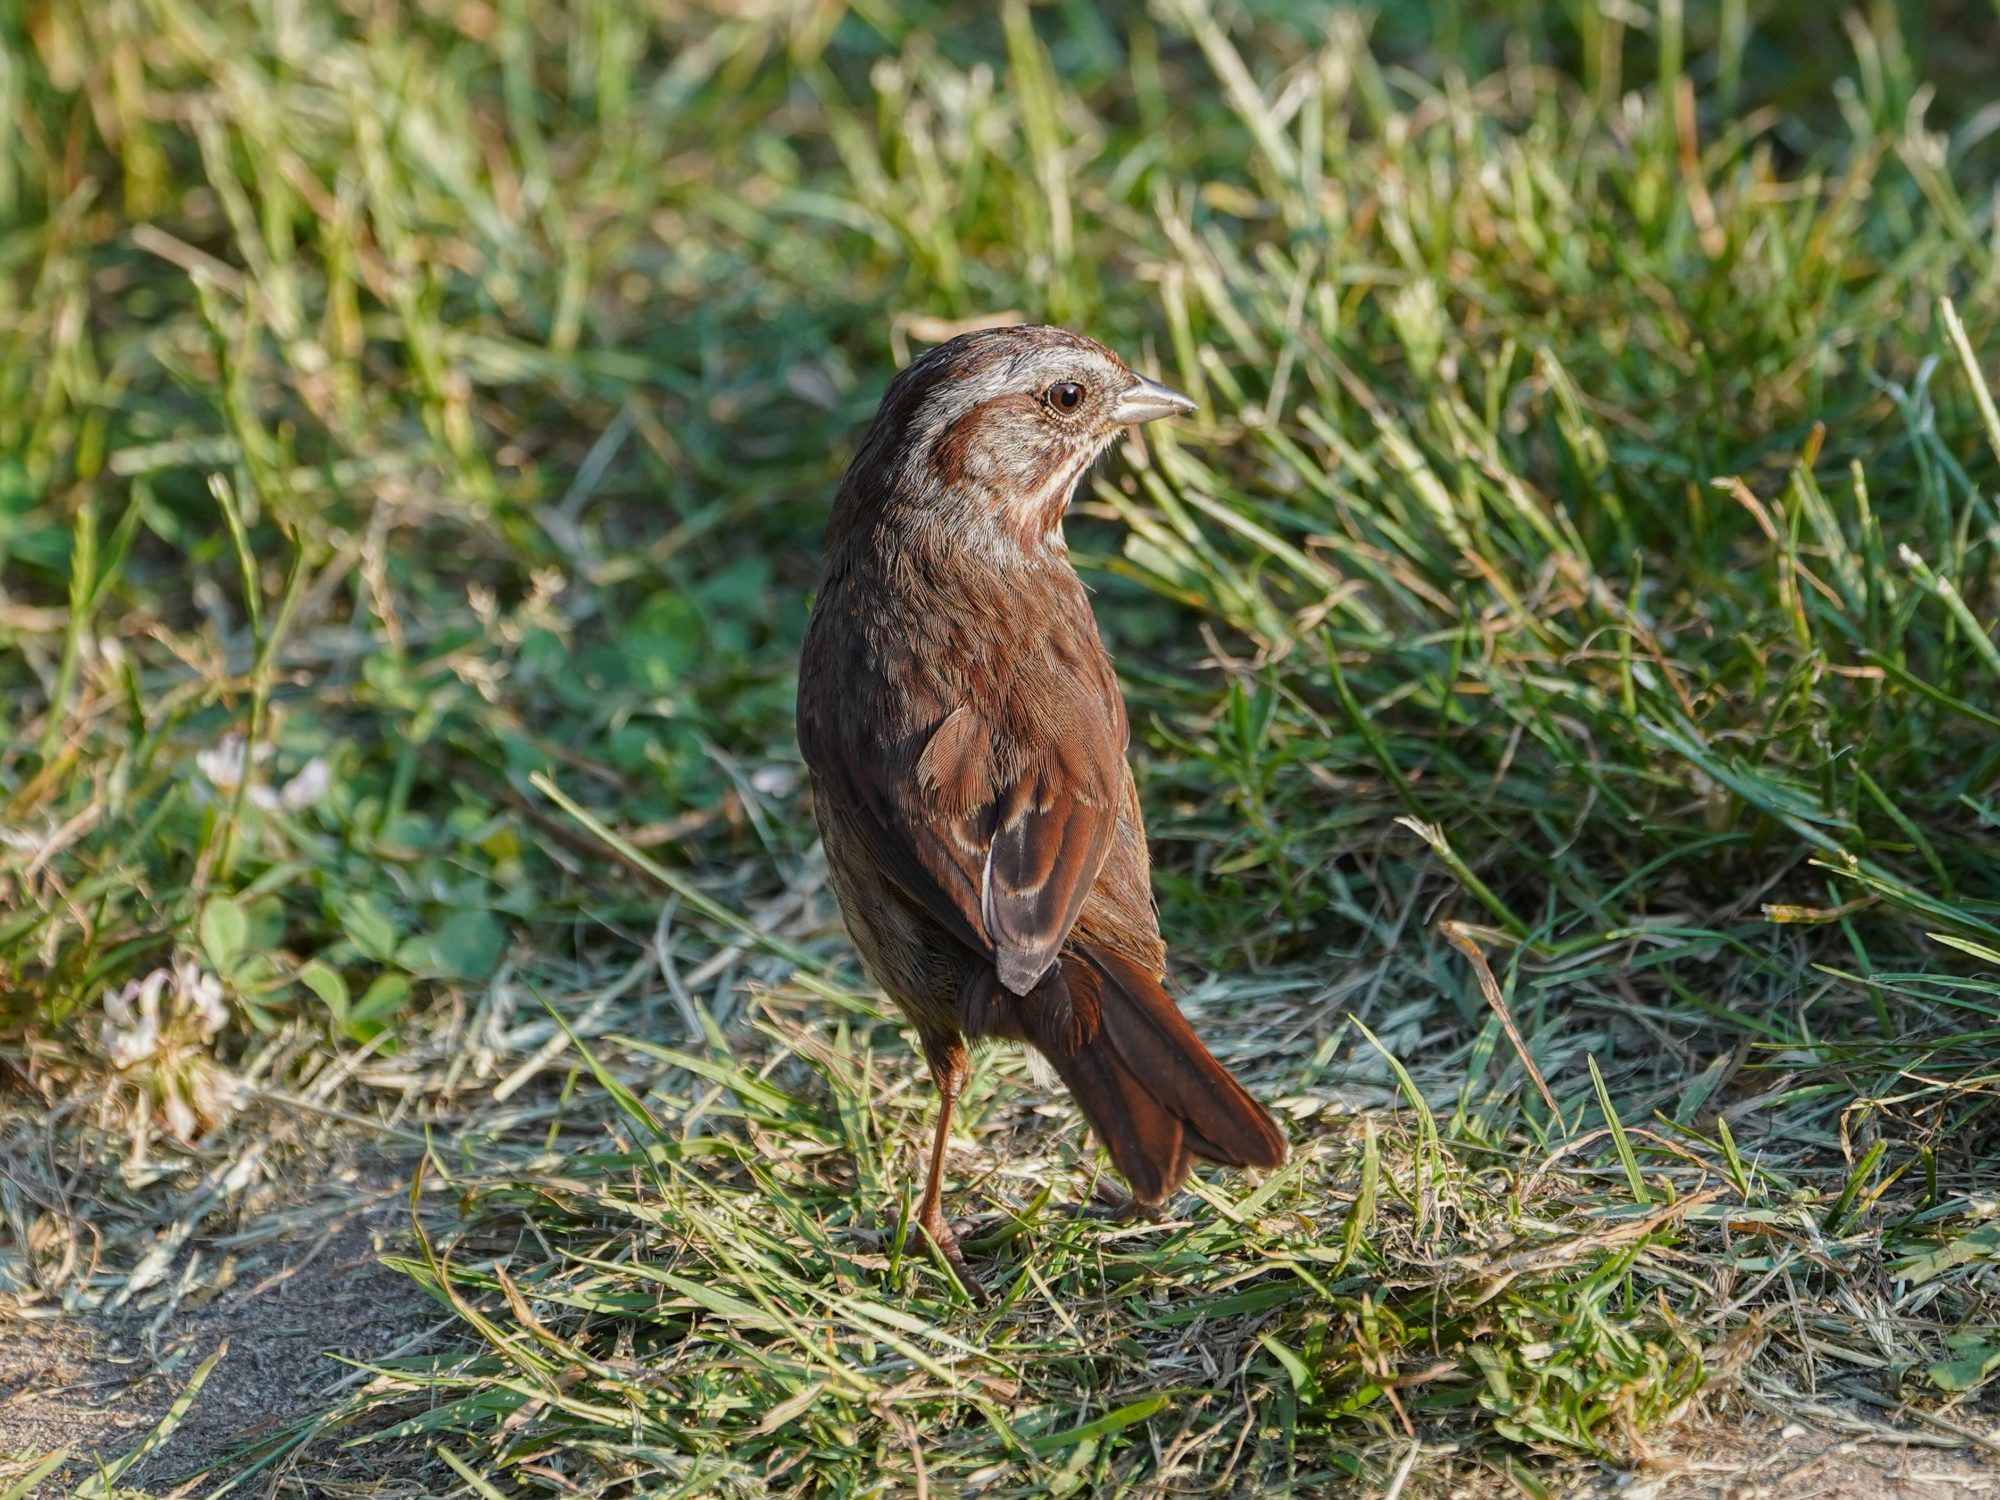 A Song Sparrow in the grass, turning to face the sun